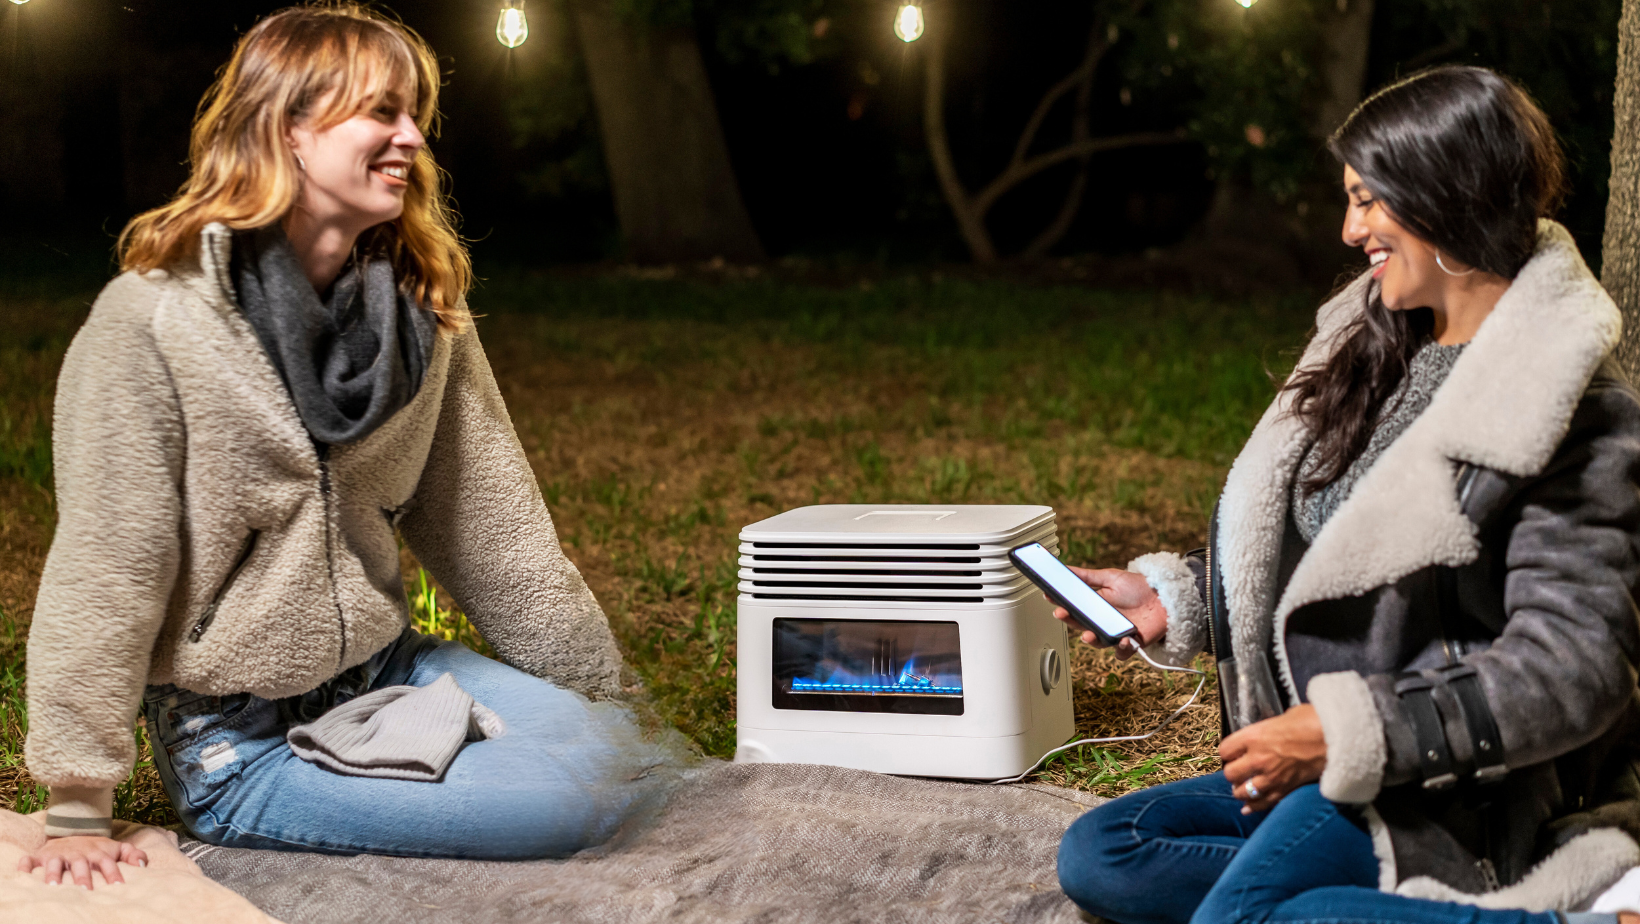 The lightweight design, integrated thermoelectric generator and USB charging port makes it the last portable heater you will ever need!  Try our off-grid portable, high efficiency, forced-air hybrid heater!